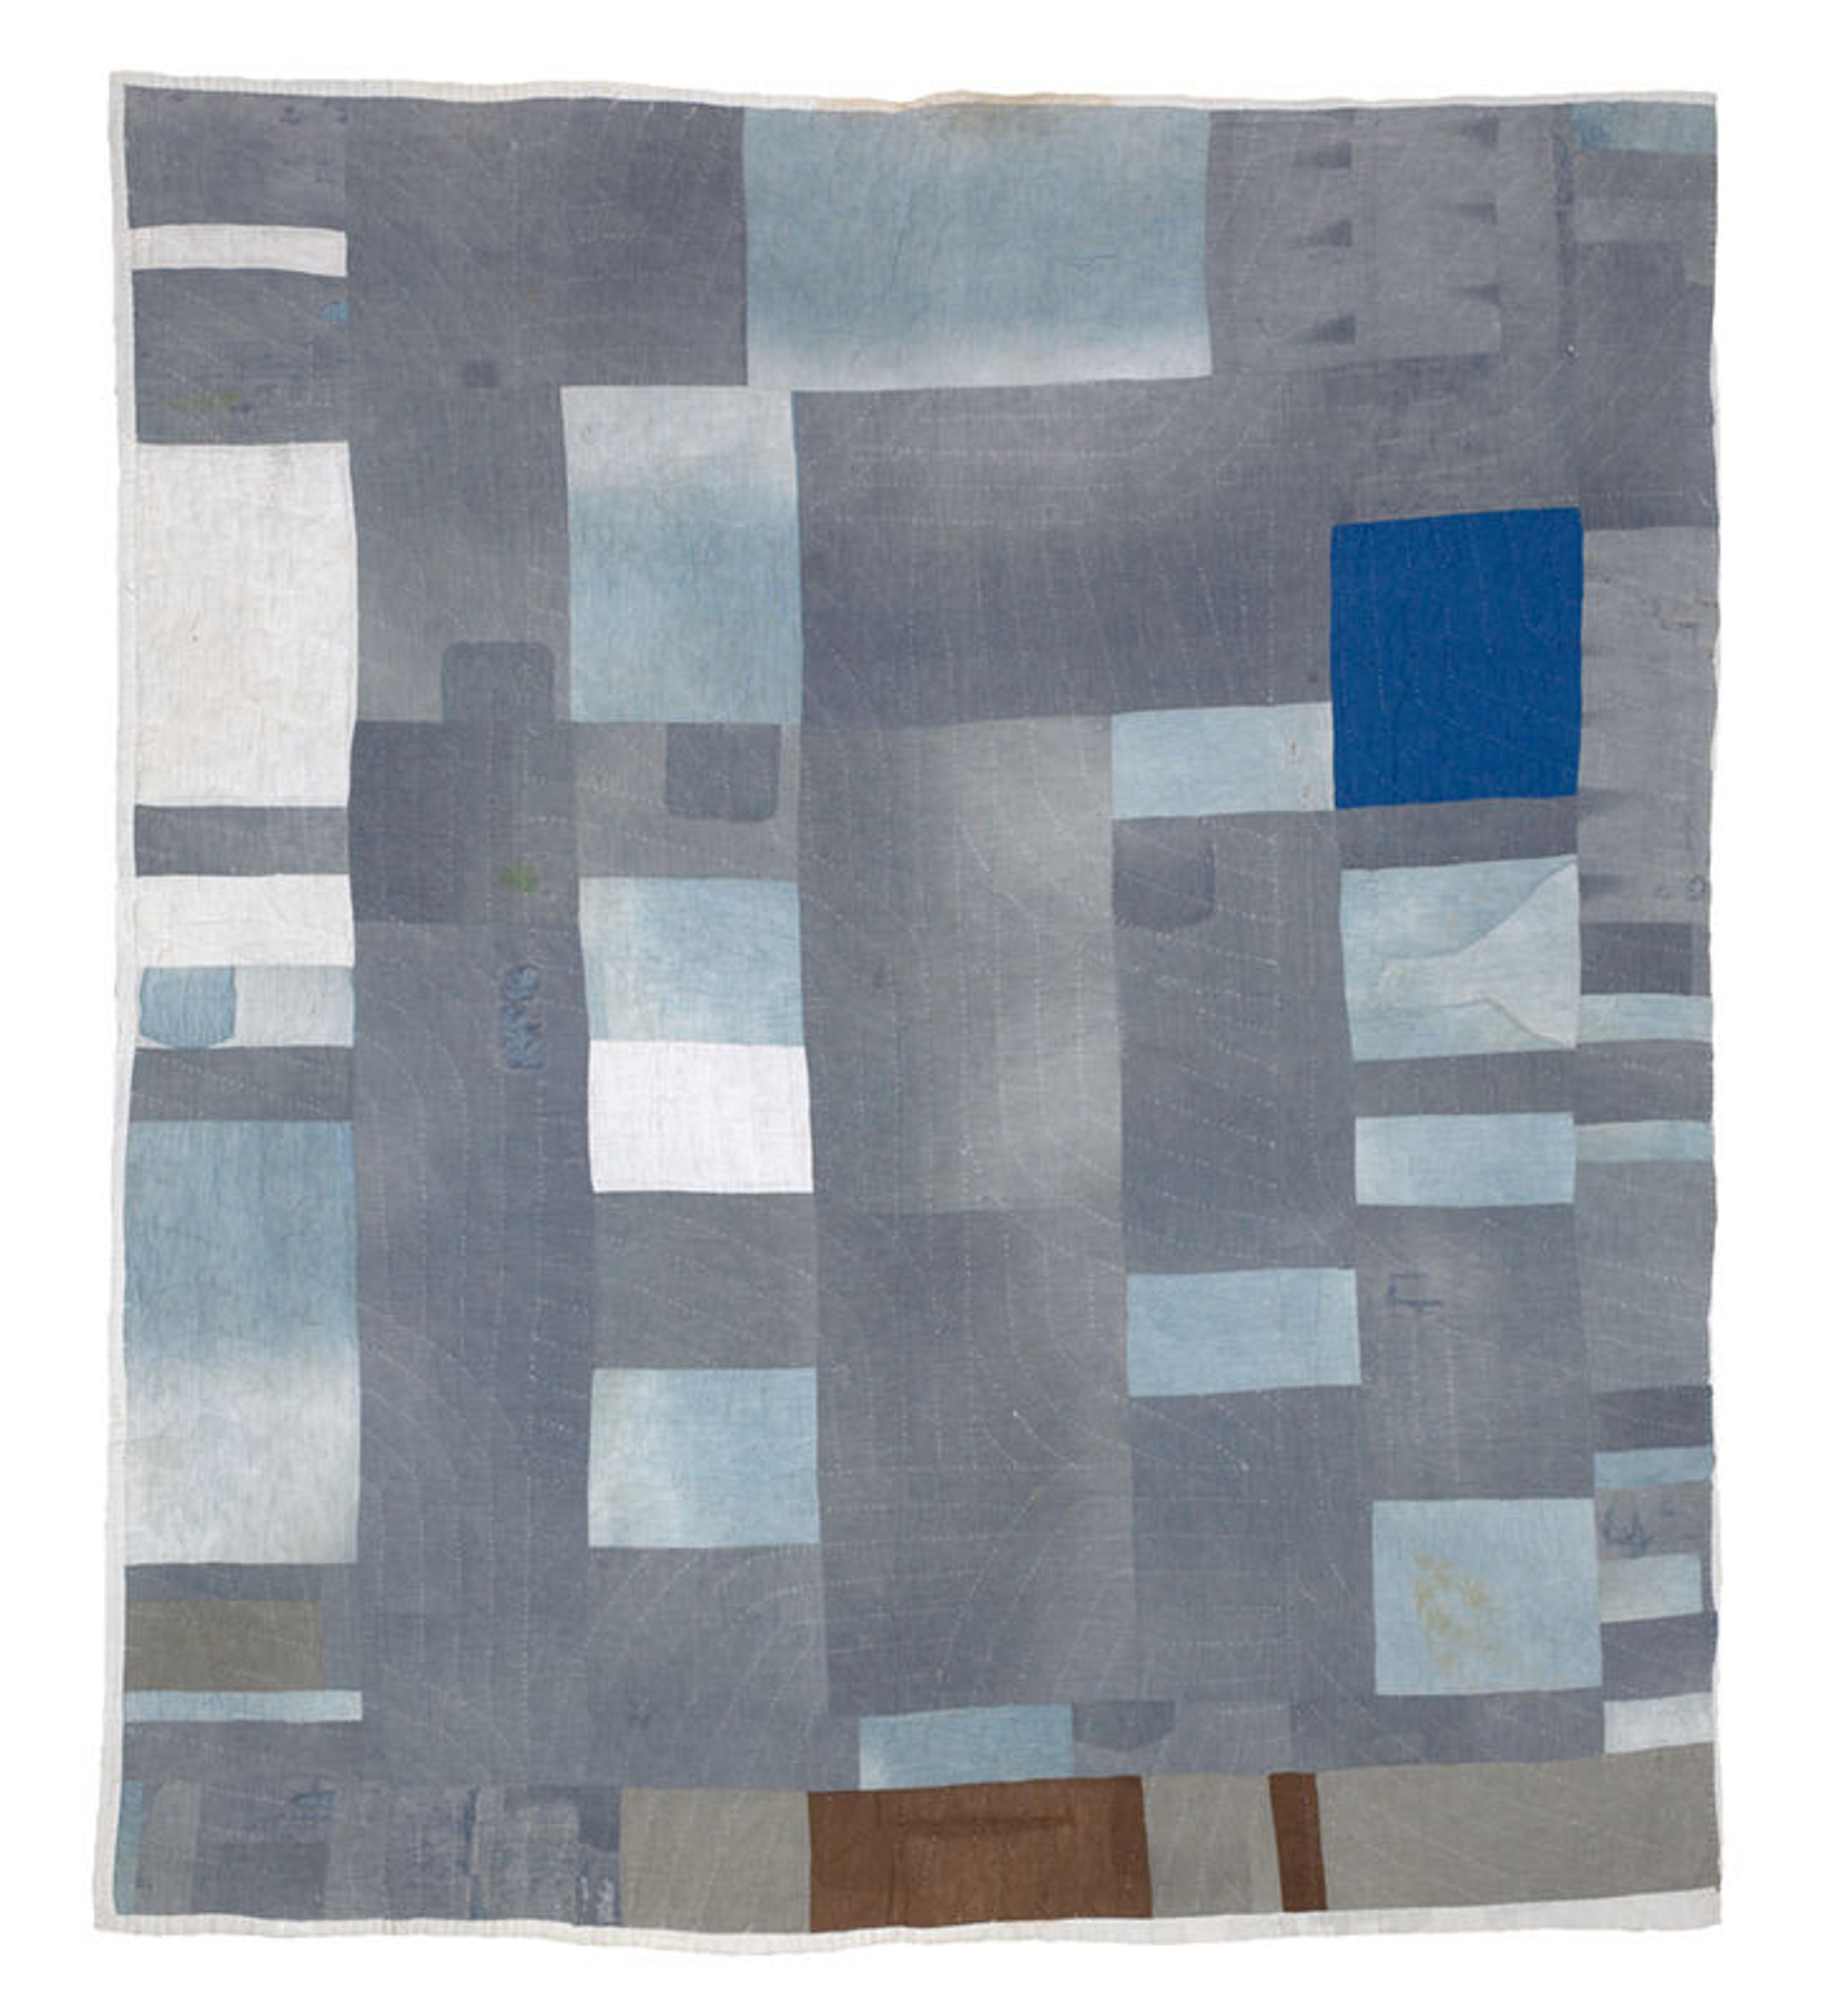 Lucy Mingo's Block and strips work-clothes quilt